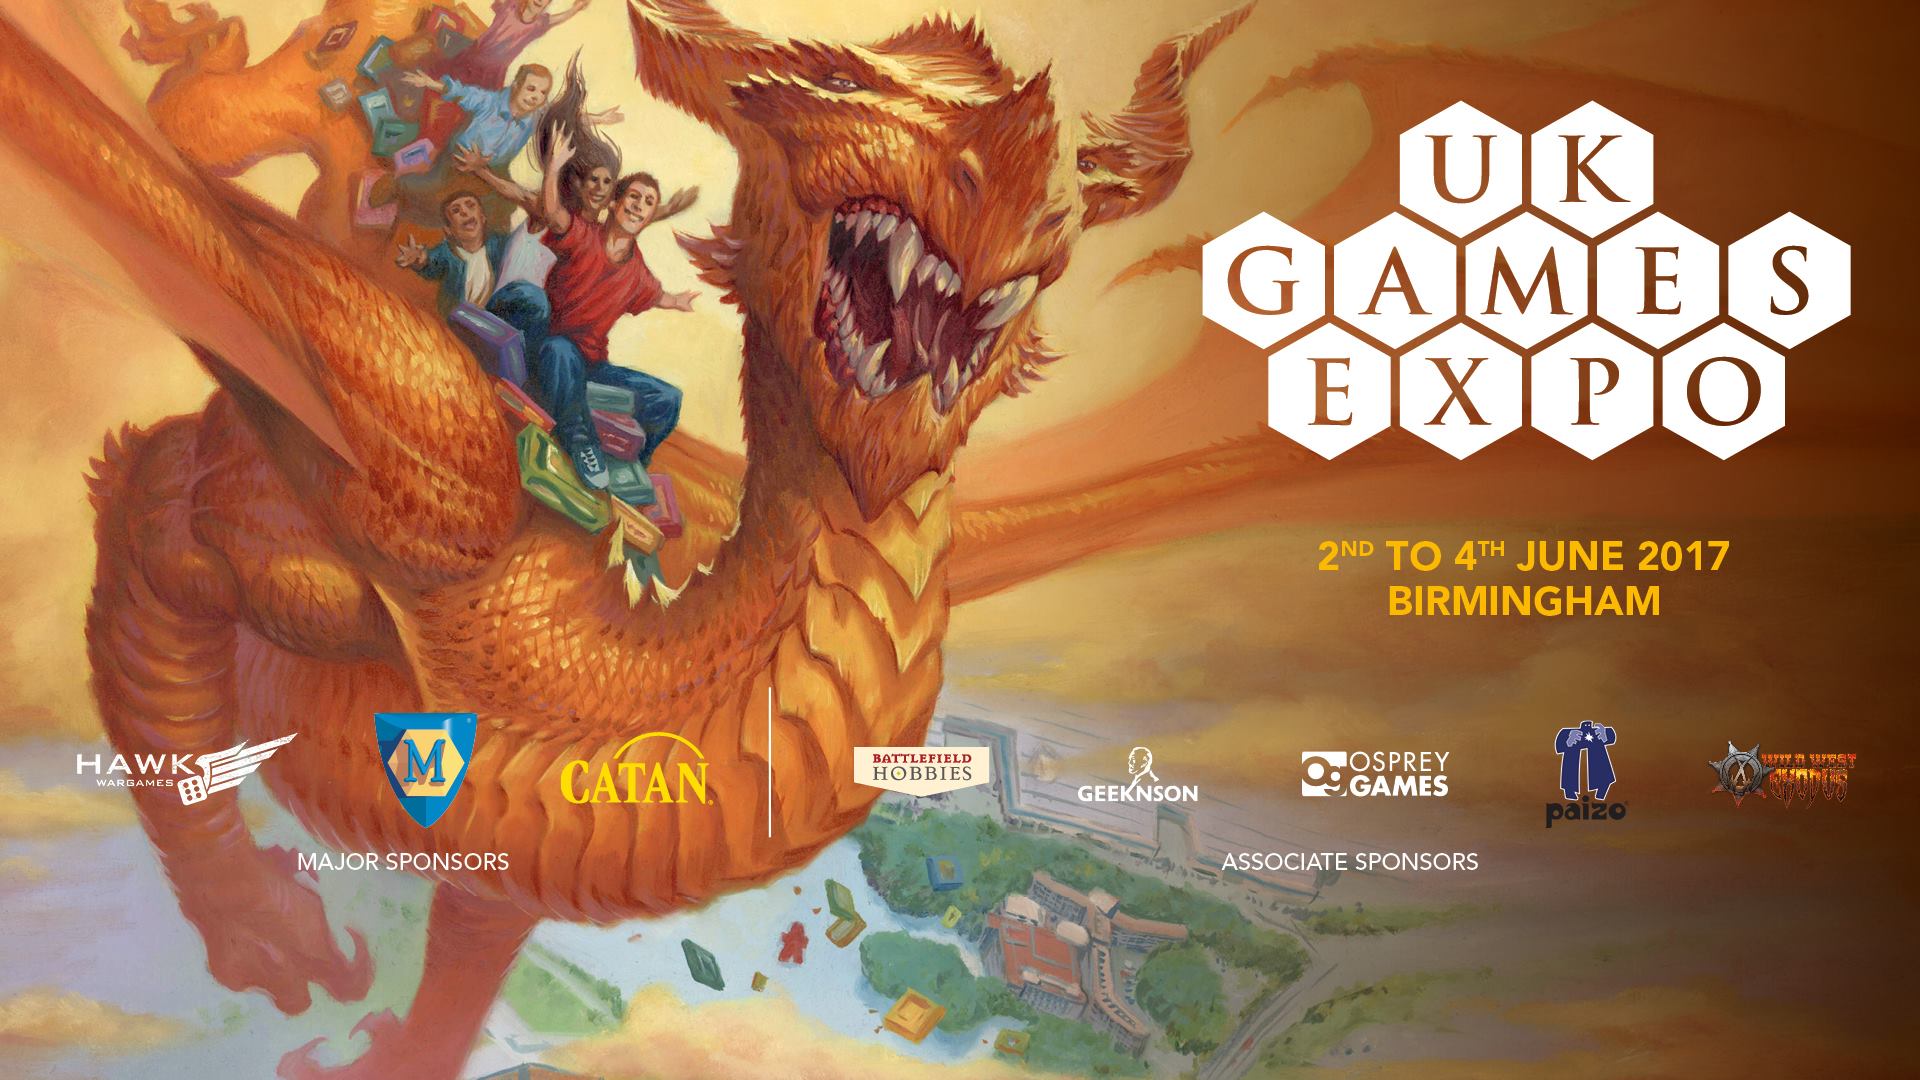 Board Game Event Tickets Now Available For The UK Games Expo